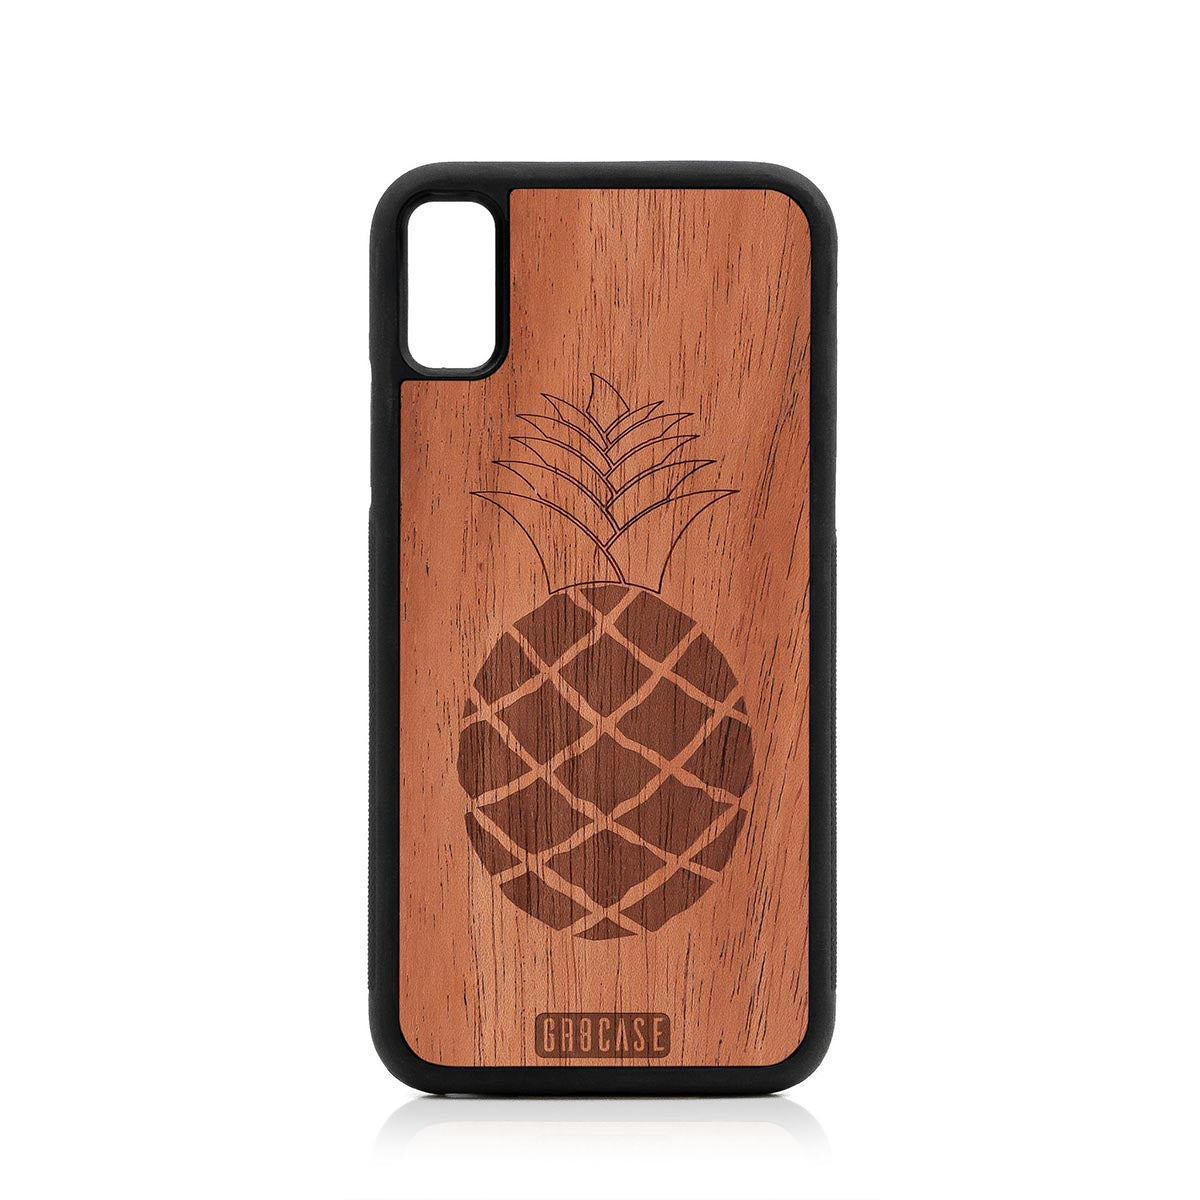 Pineapple Design Wood Case For iPhone XR by GR8CASE